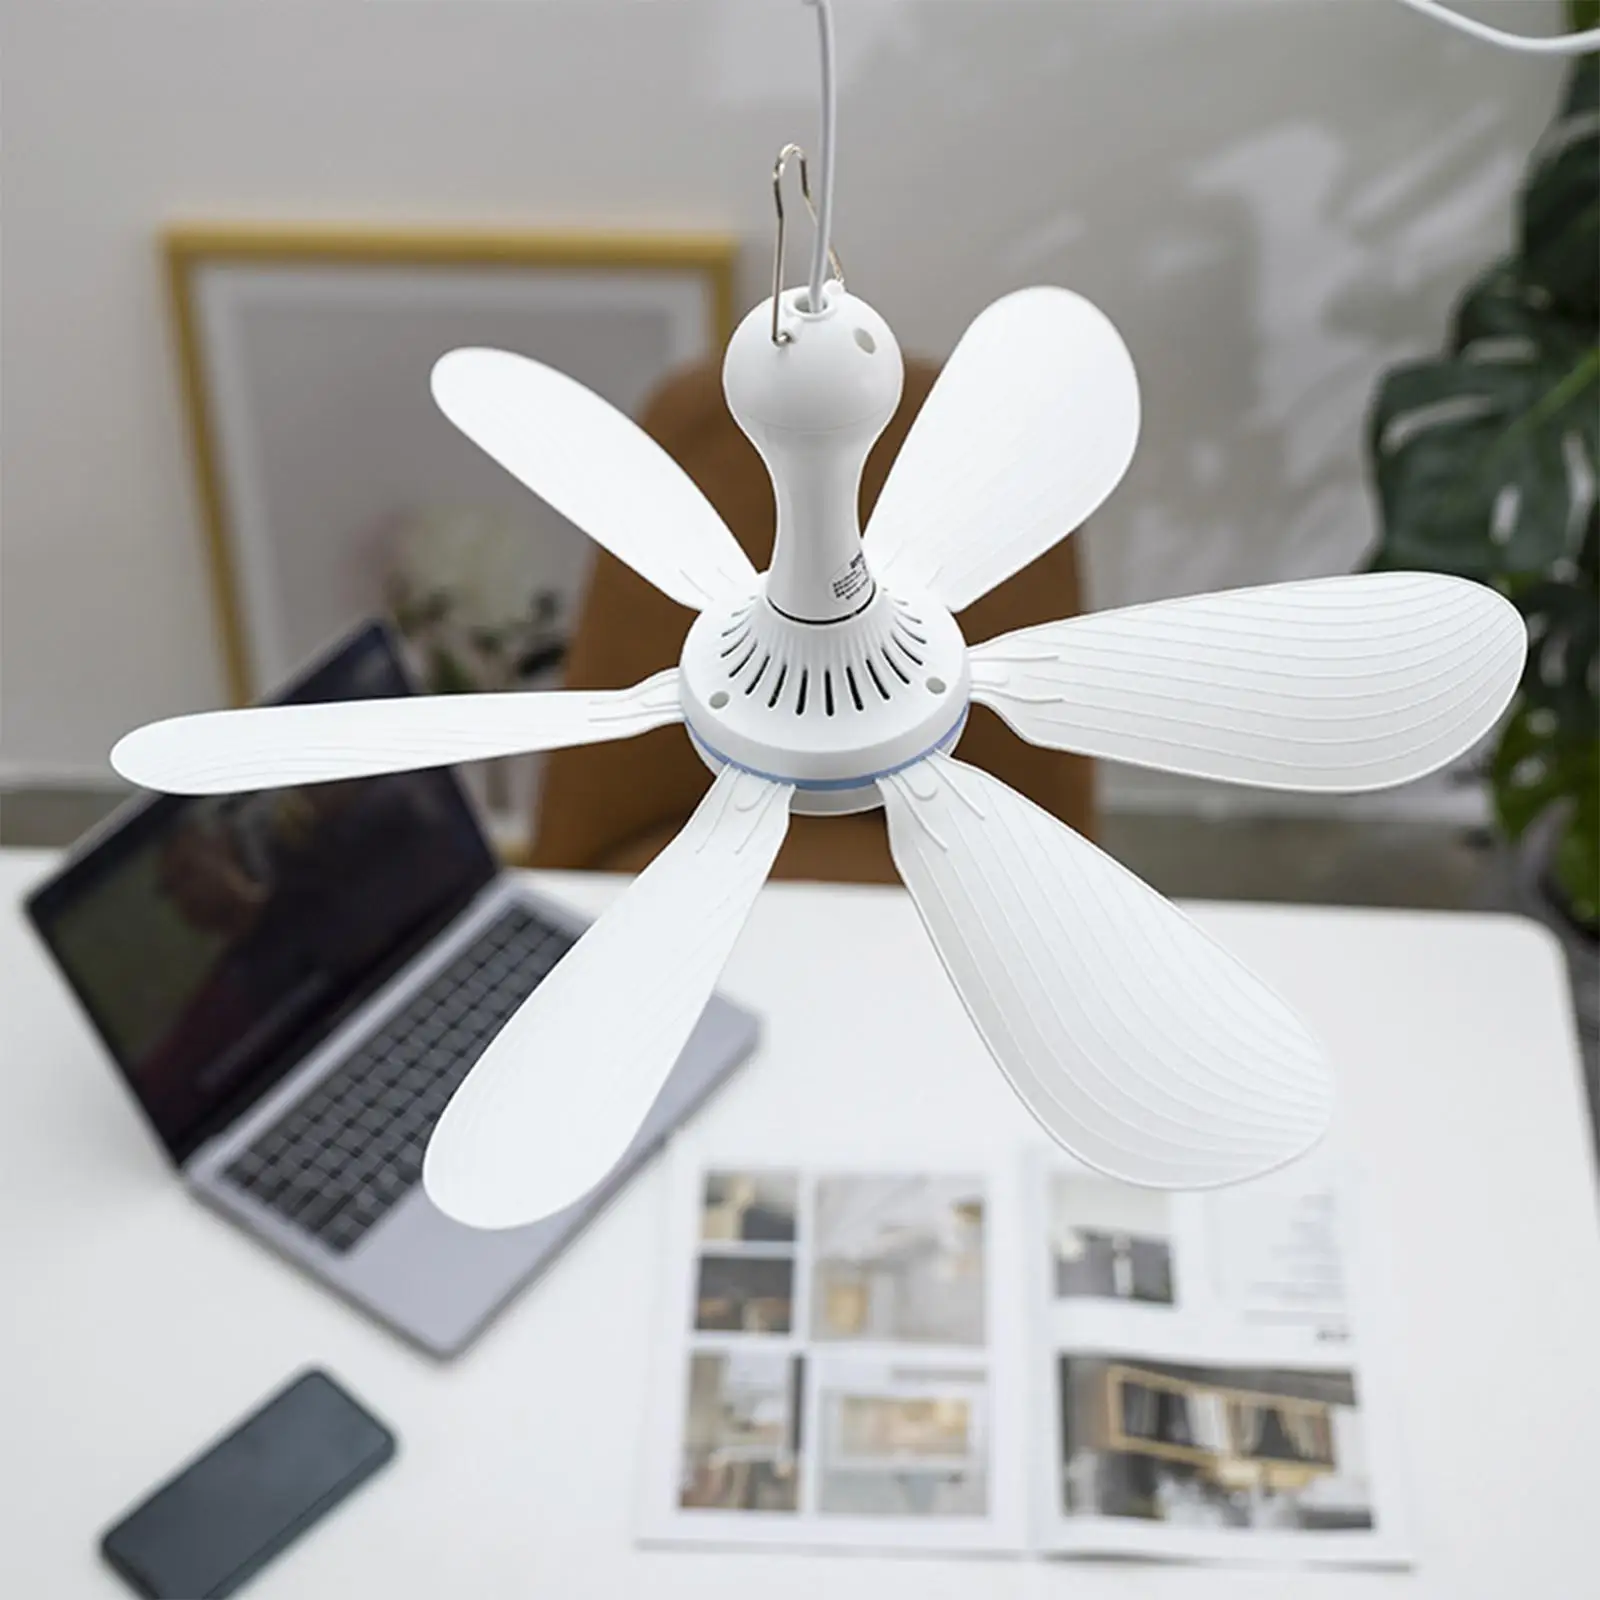 Personal Mini USB Ceiling Fan USB Hanging Fan Air Cooler Quiet Electrical Fan White 5V for Basement Camping Emergency Bed Office